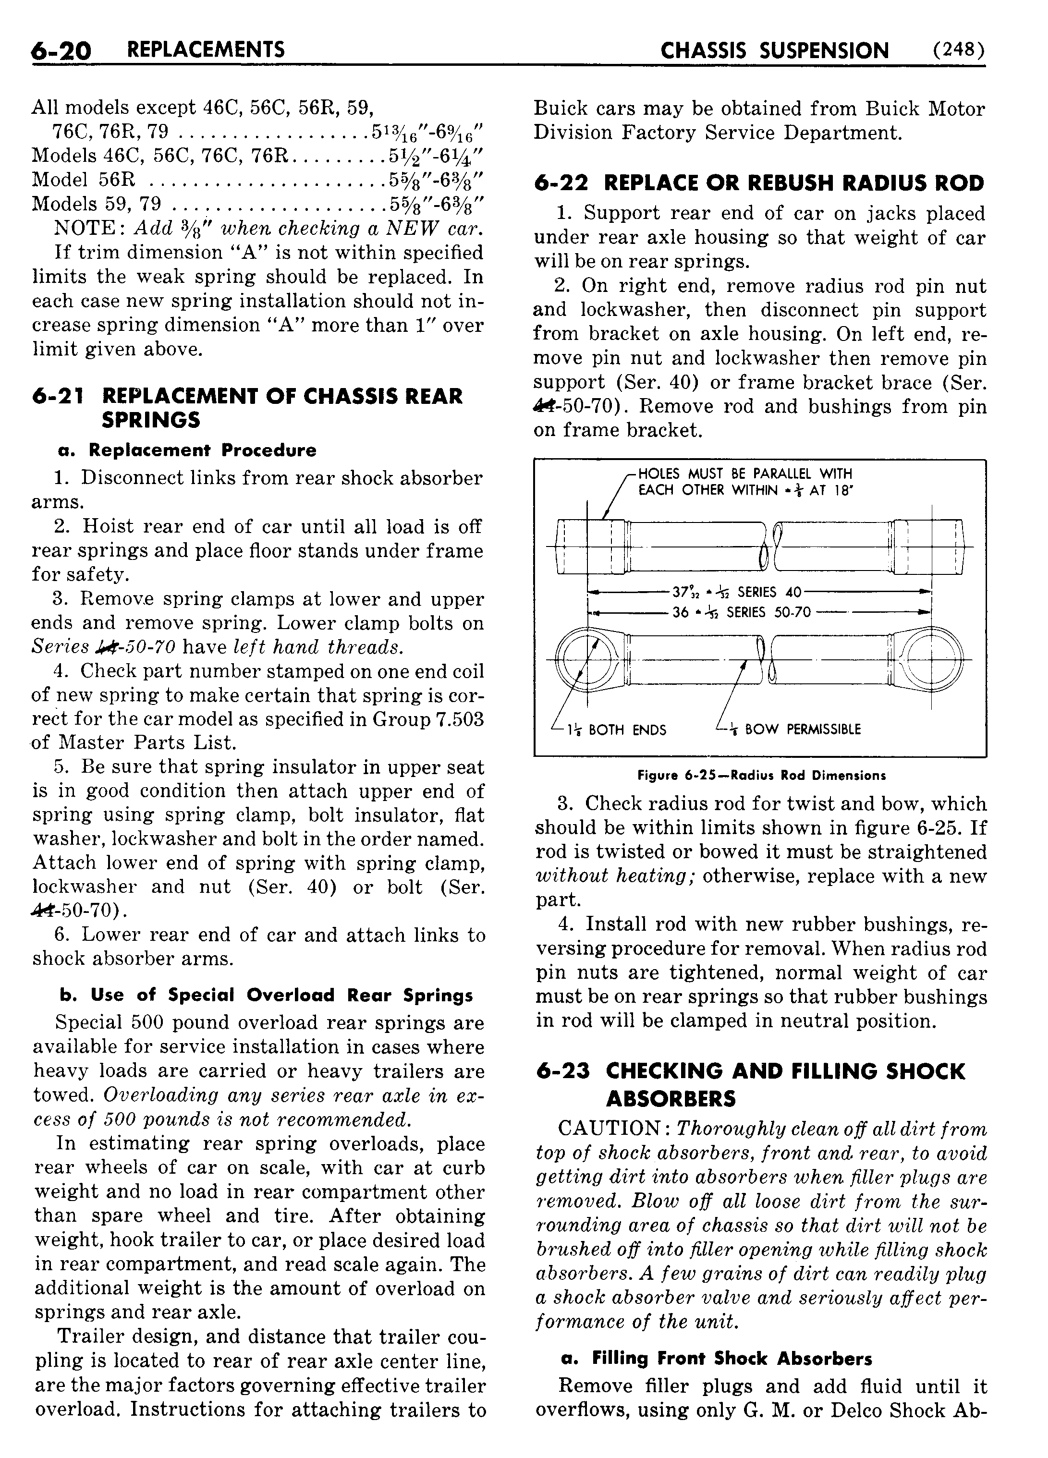 n_07 1951 Buick Shop Manual - Chassis Suspension-020-020.jpg